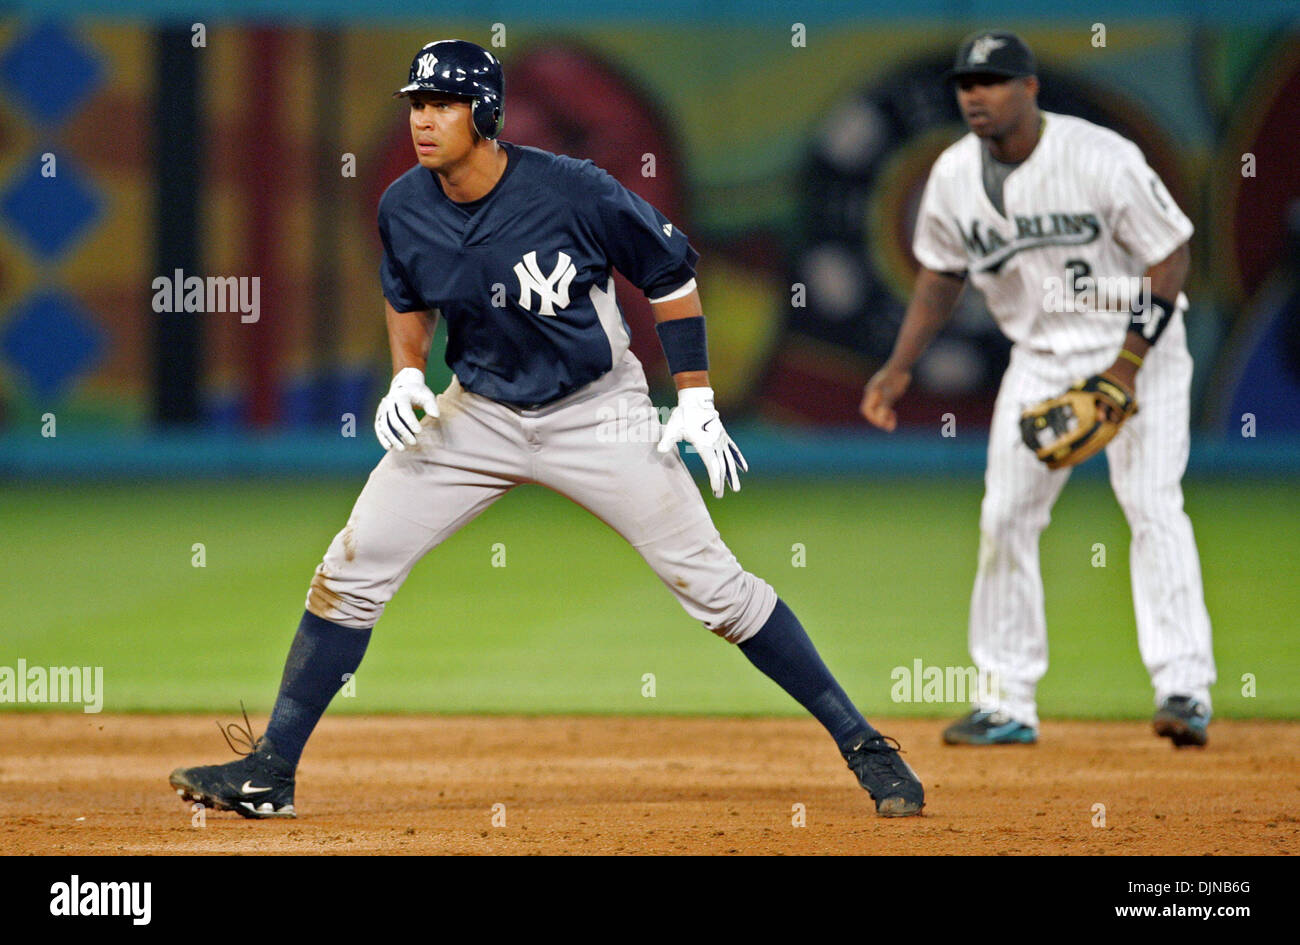 Mar 28, 2008 - Miami Gardens, Florida, USA - New York Yankees at Florida Marlins Spring Training game at Dolphin Stadium..Yankee's ALEX RODRIGUEZ takes a lead at second base after reaching base on a double. (Credit Image: © Allen Eyestone/Palm Beach Post/ZUMA Press) RESTRICTIONS: * USA Tabloids Rights OUT * Stock Photo